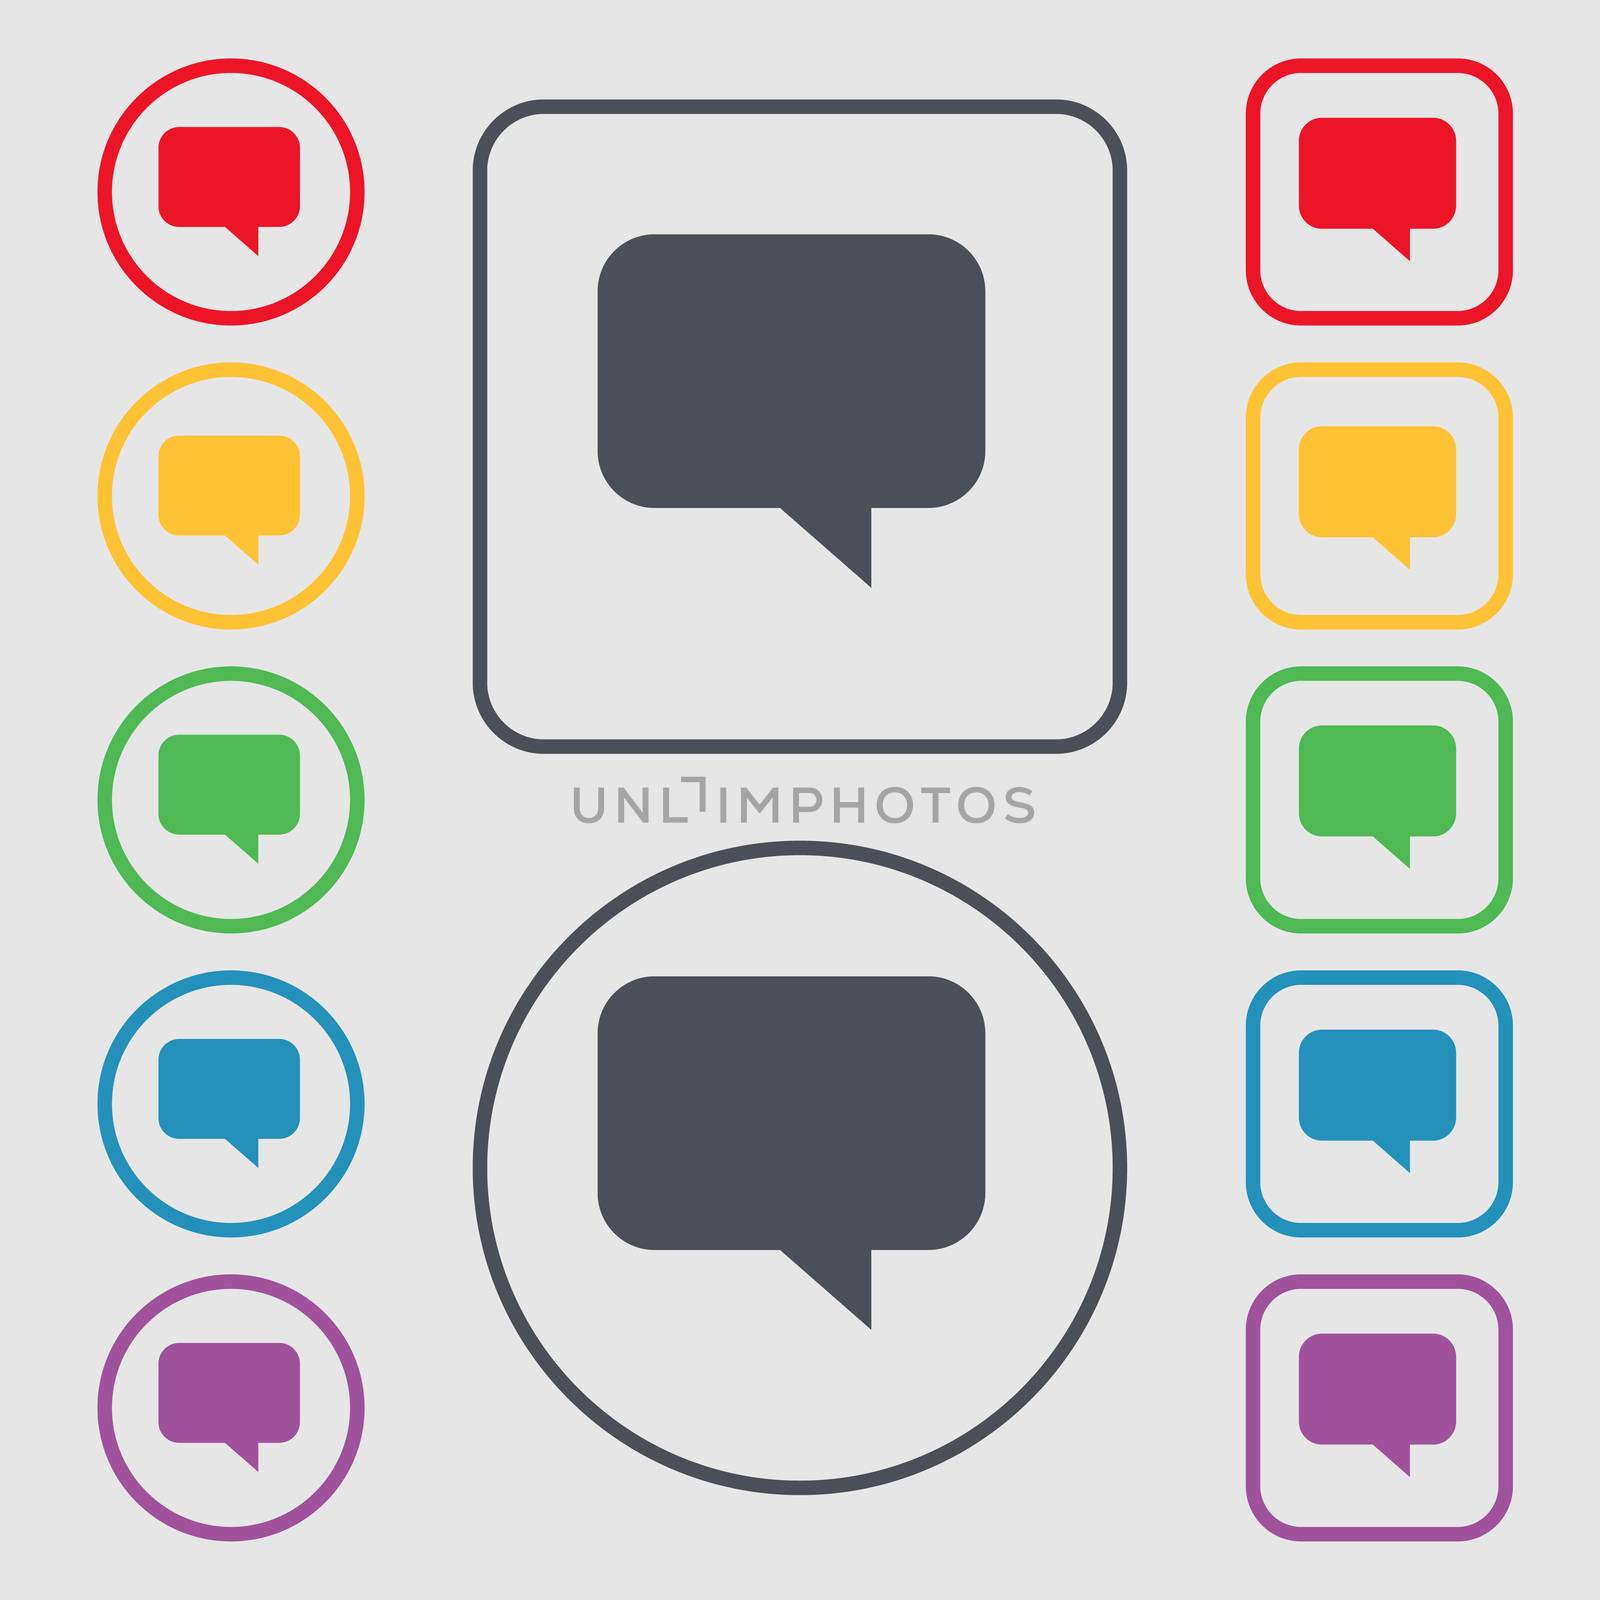 speech bubble, Chat think icon sign. symbol on the Round and square buttons with frame. illustration